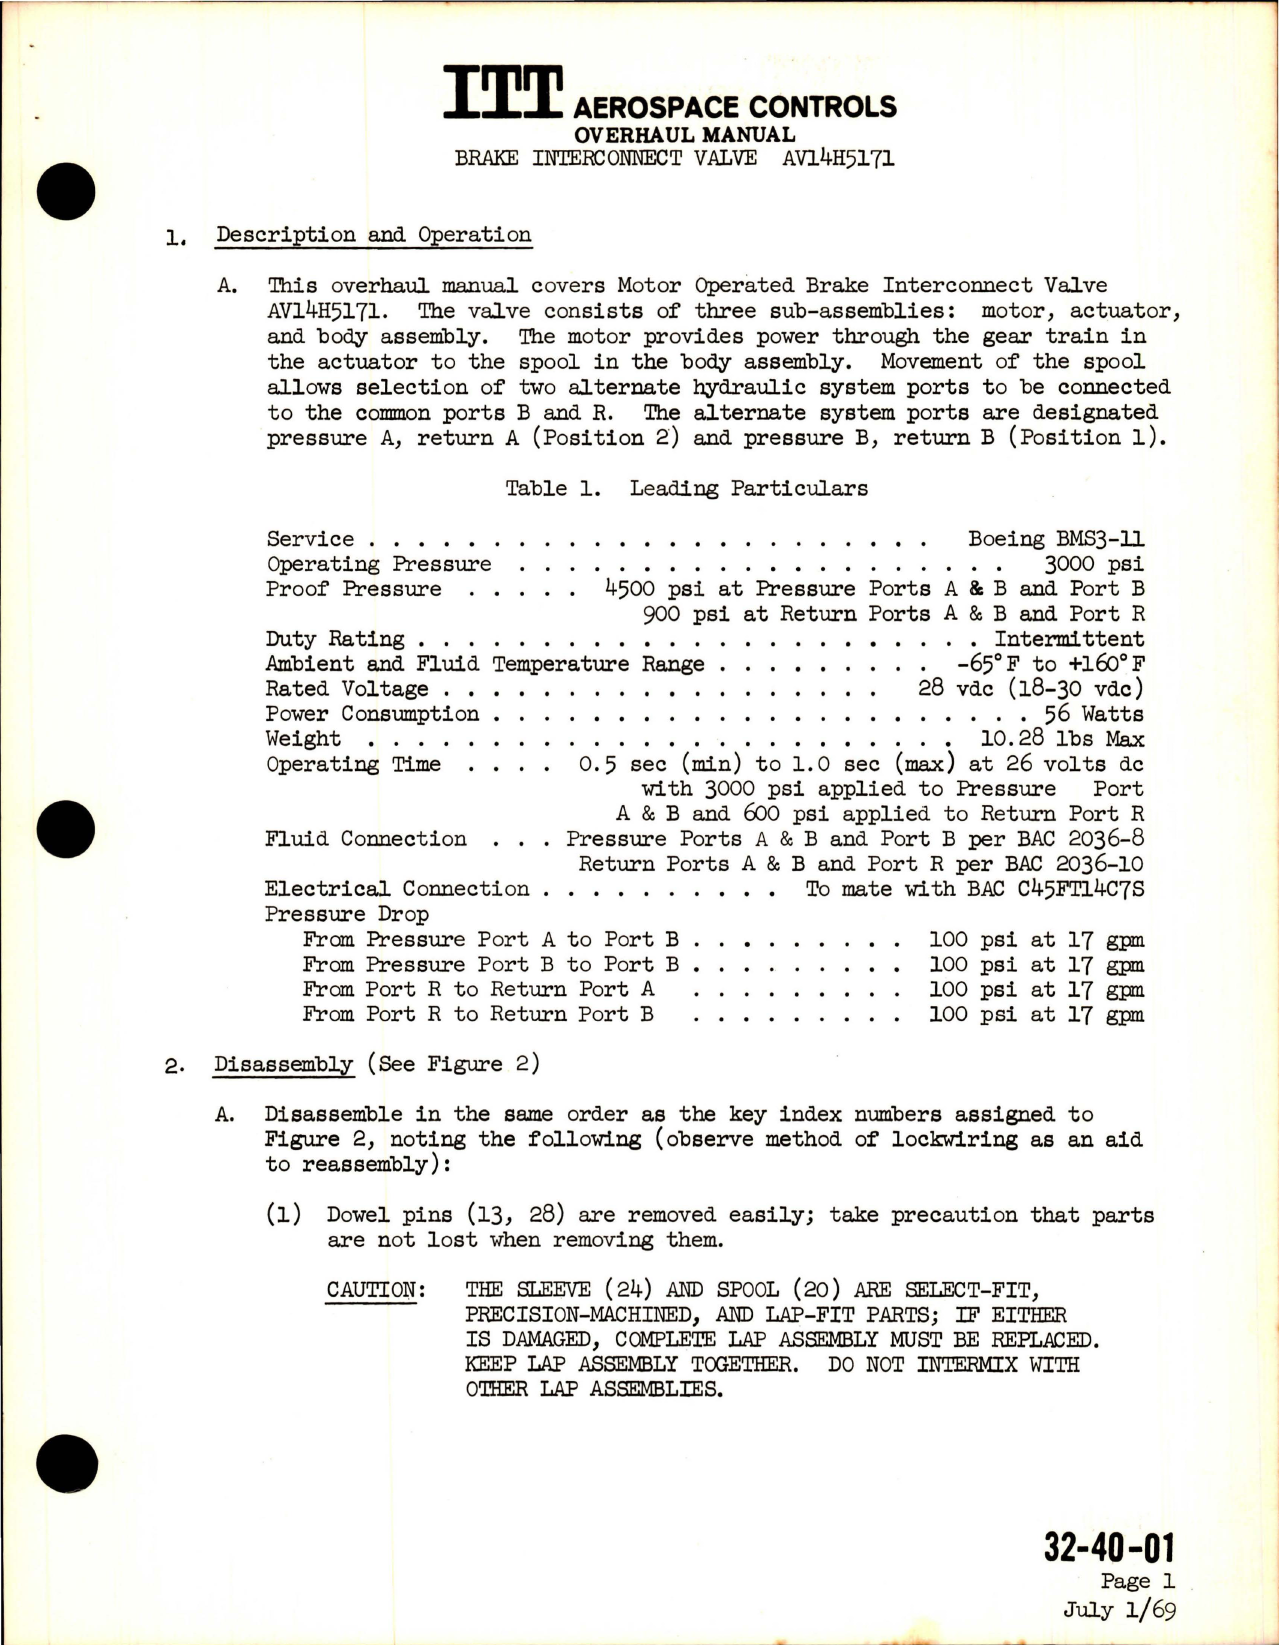 Sample page 7 from AirCorps Library document: Overhaul Instructions with Illustrated Parts List for Brake Interconnect Valve 